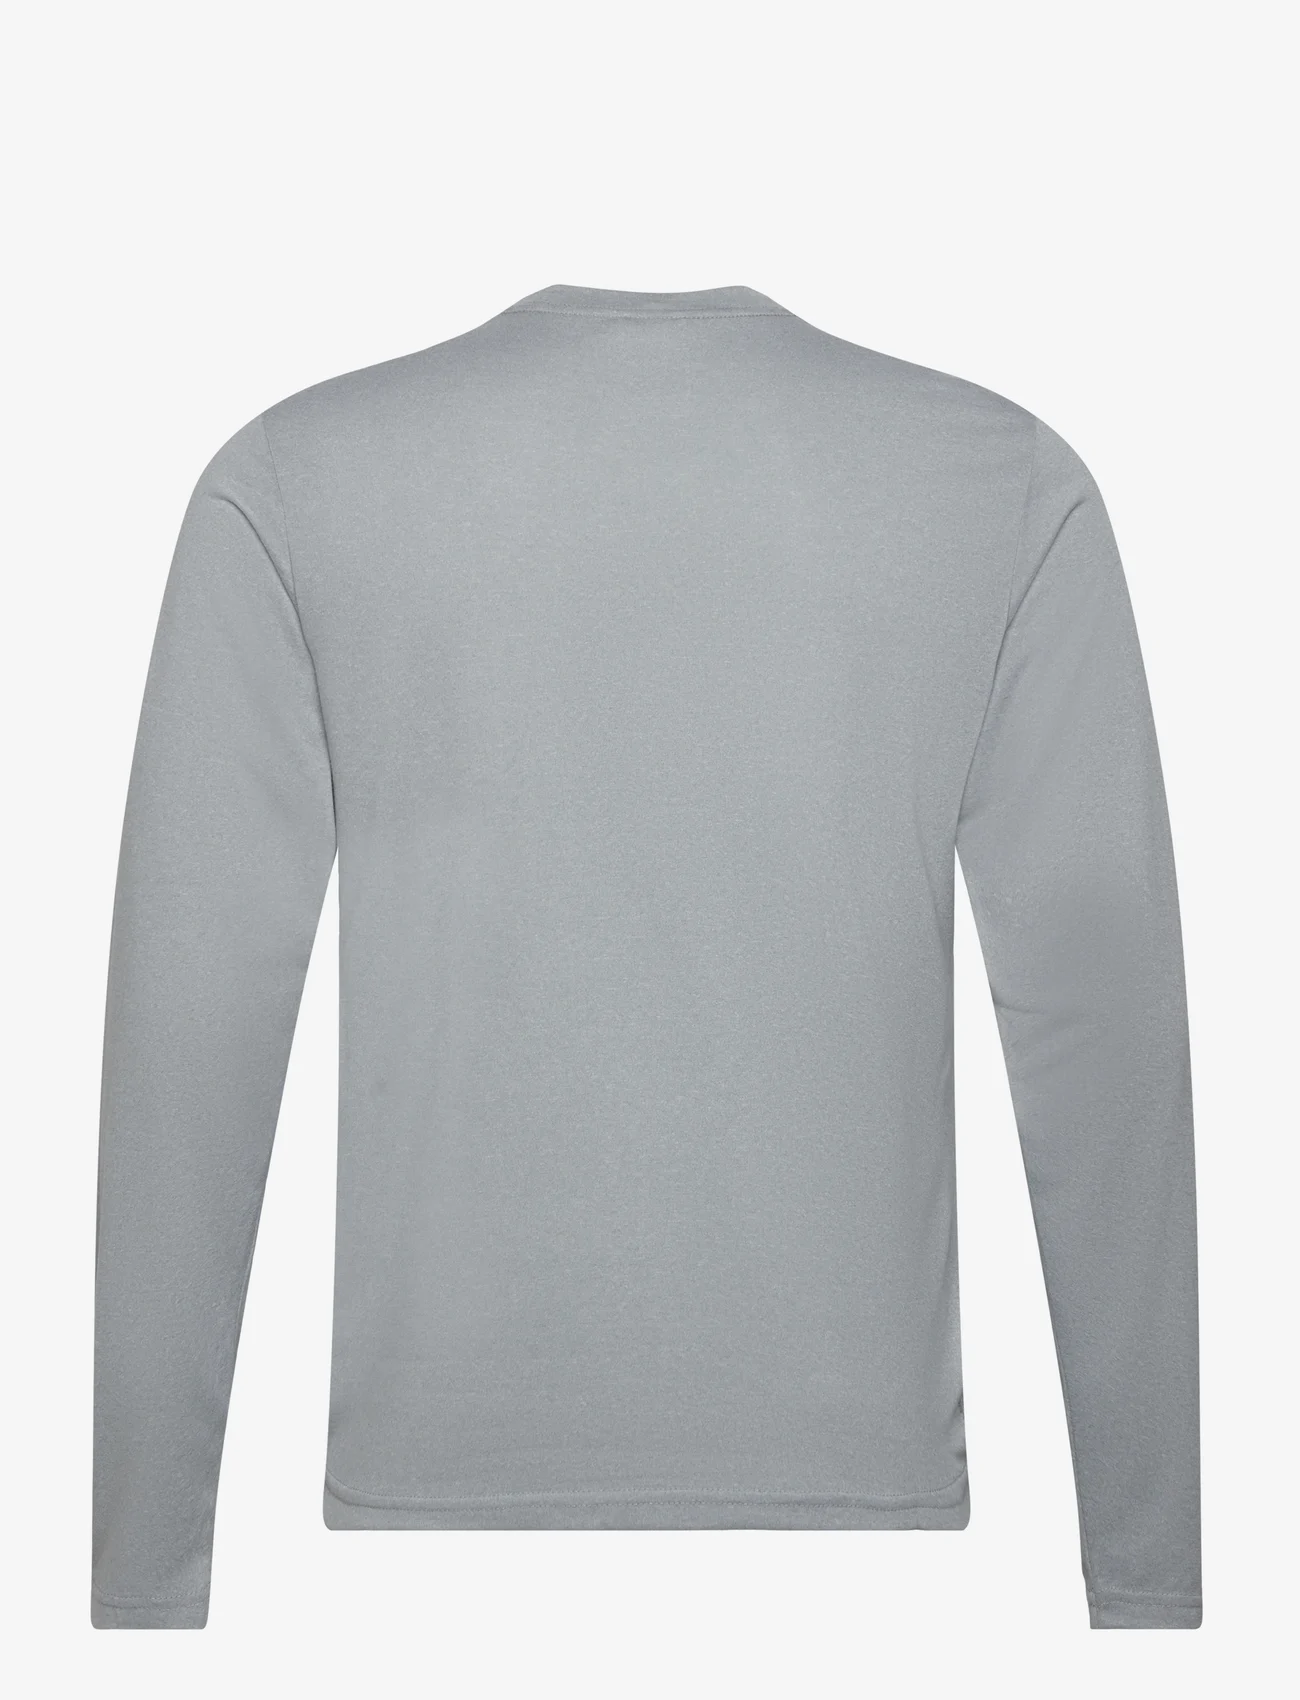 The North Face - M REAXION AMP L/S CREW - EU - mid grey heather - 1